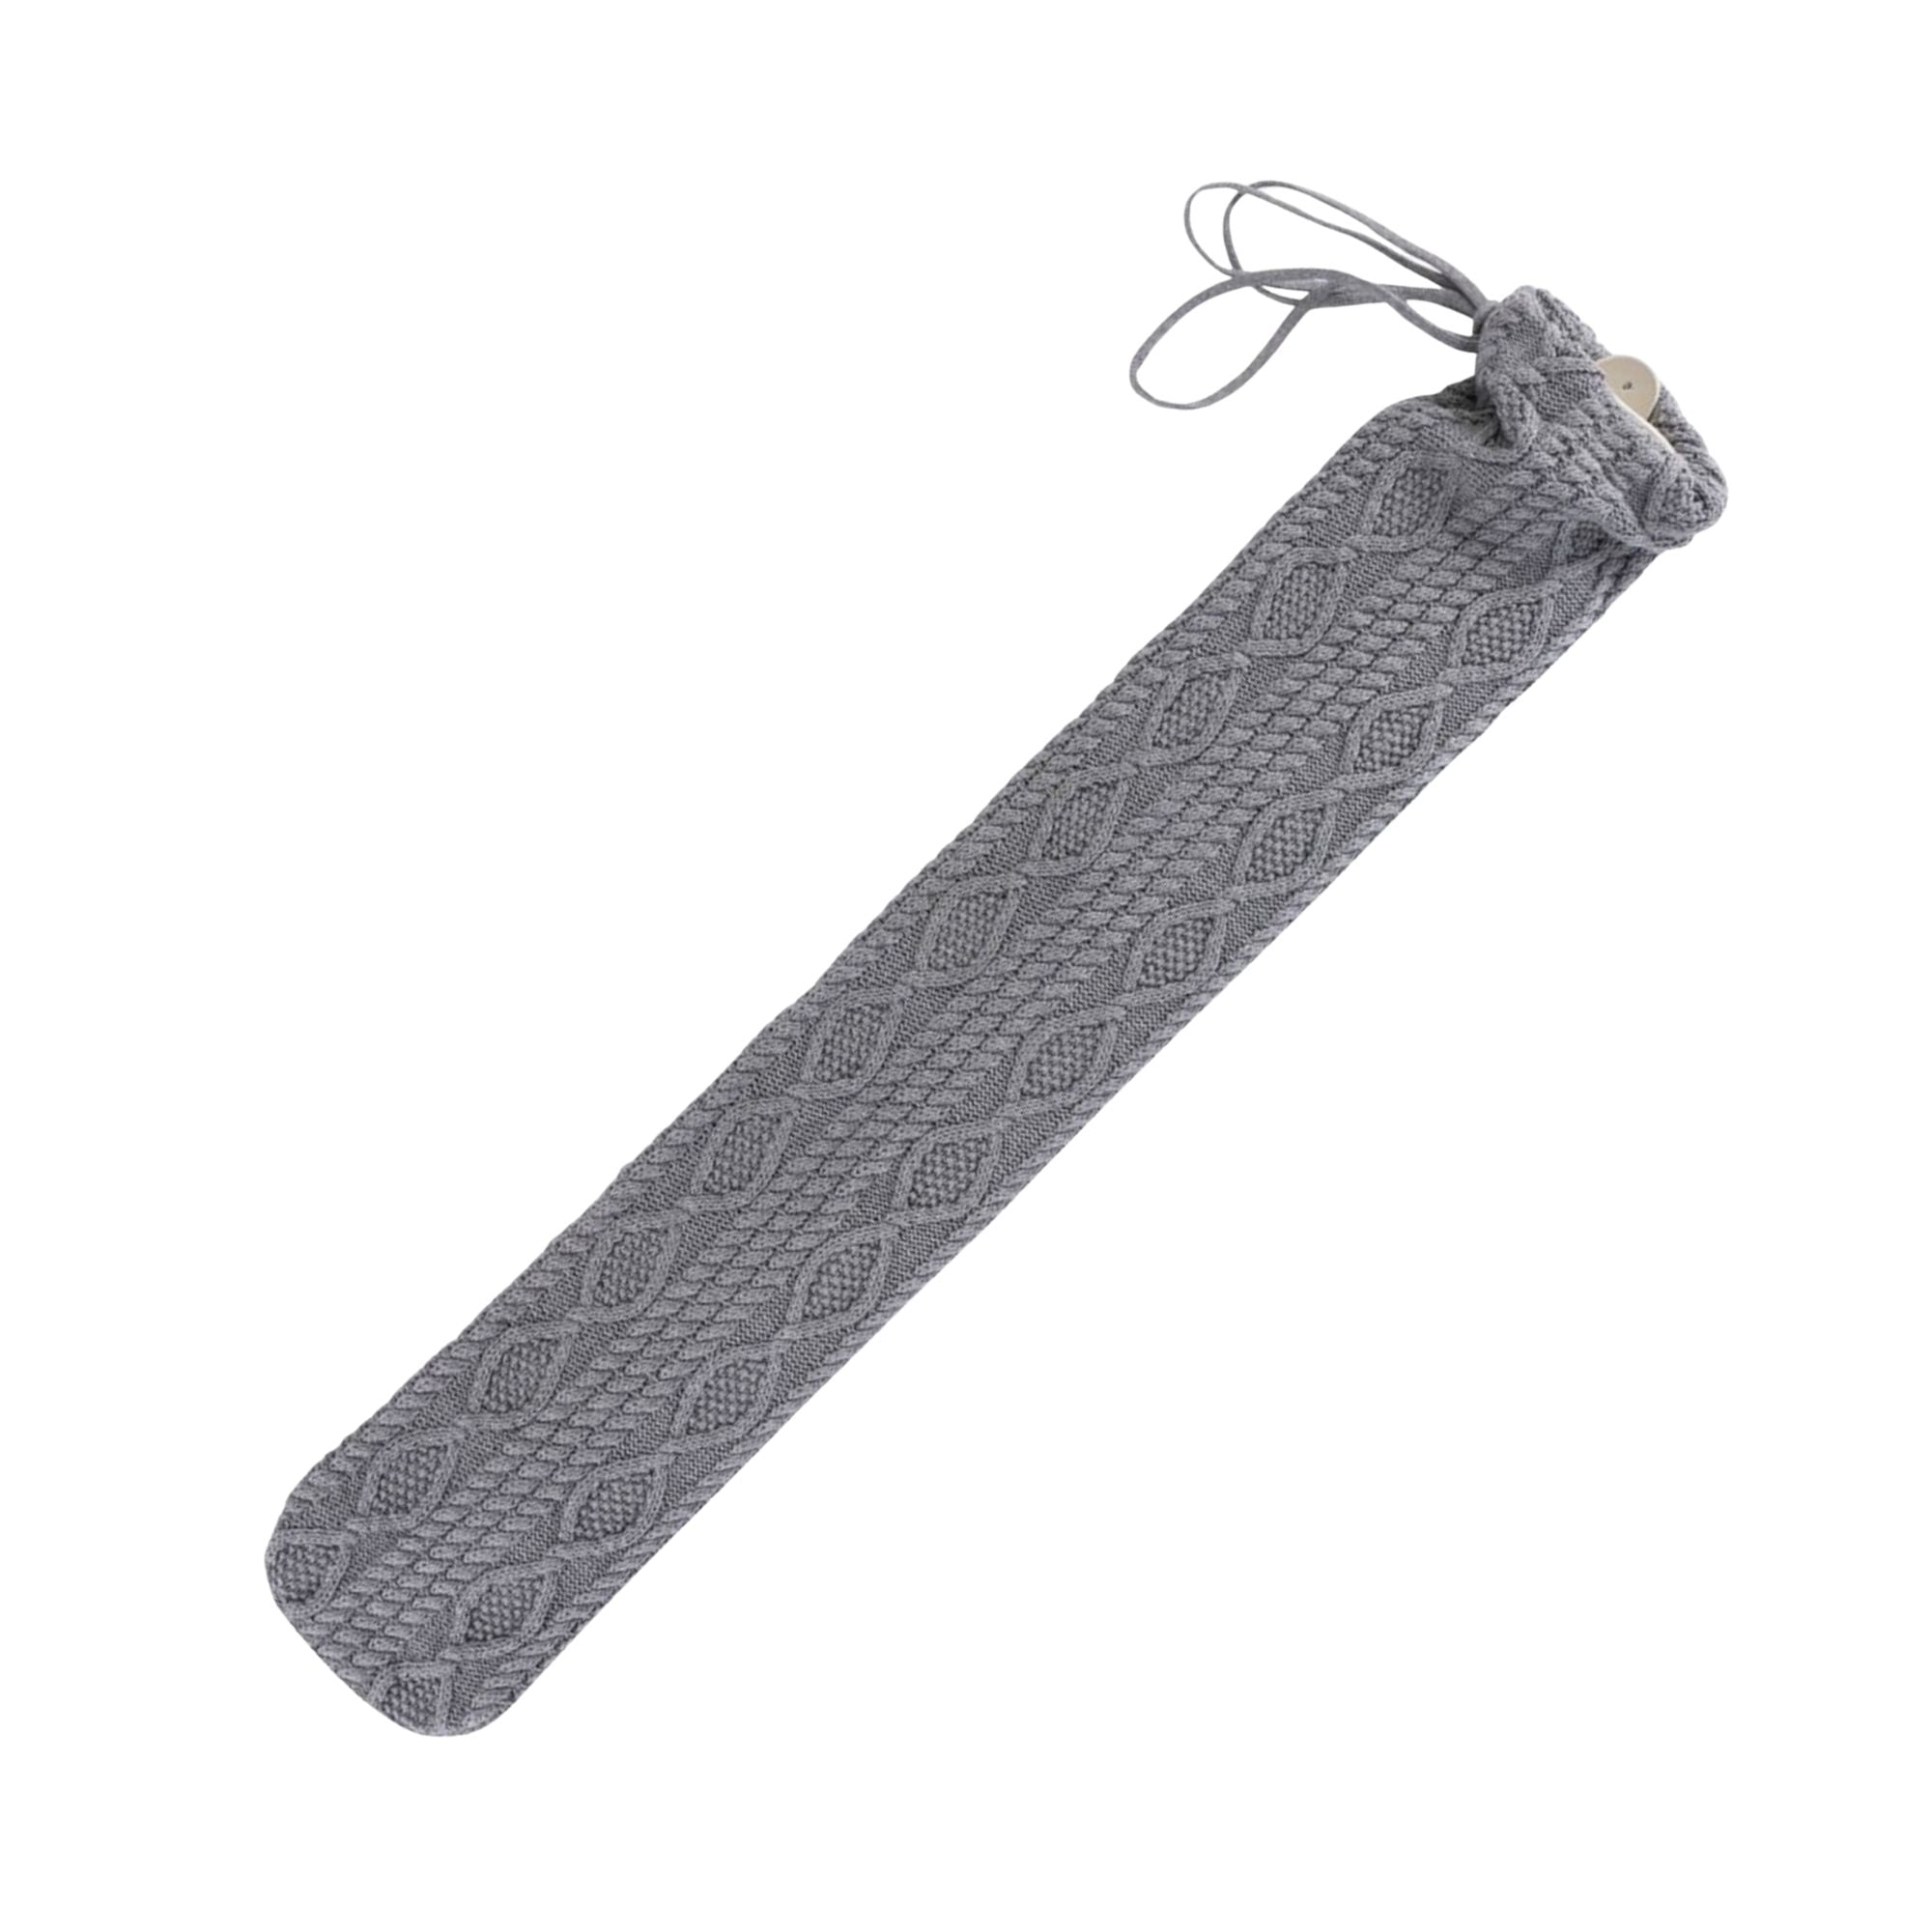 2.5 Litre Long Sanger Hot Water Bottle with Grey Cable Knit Cotton Cover